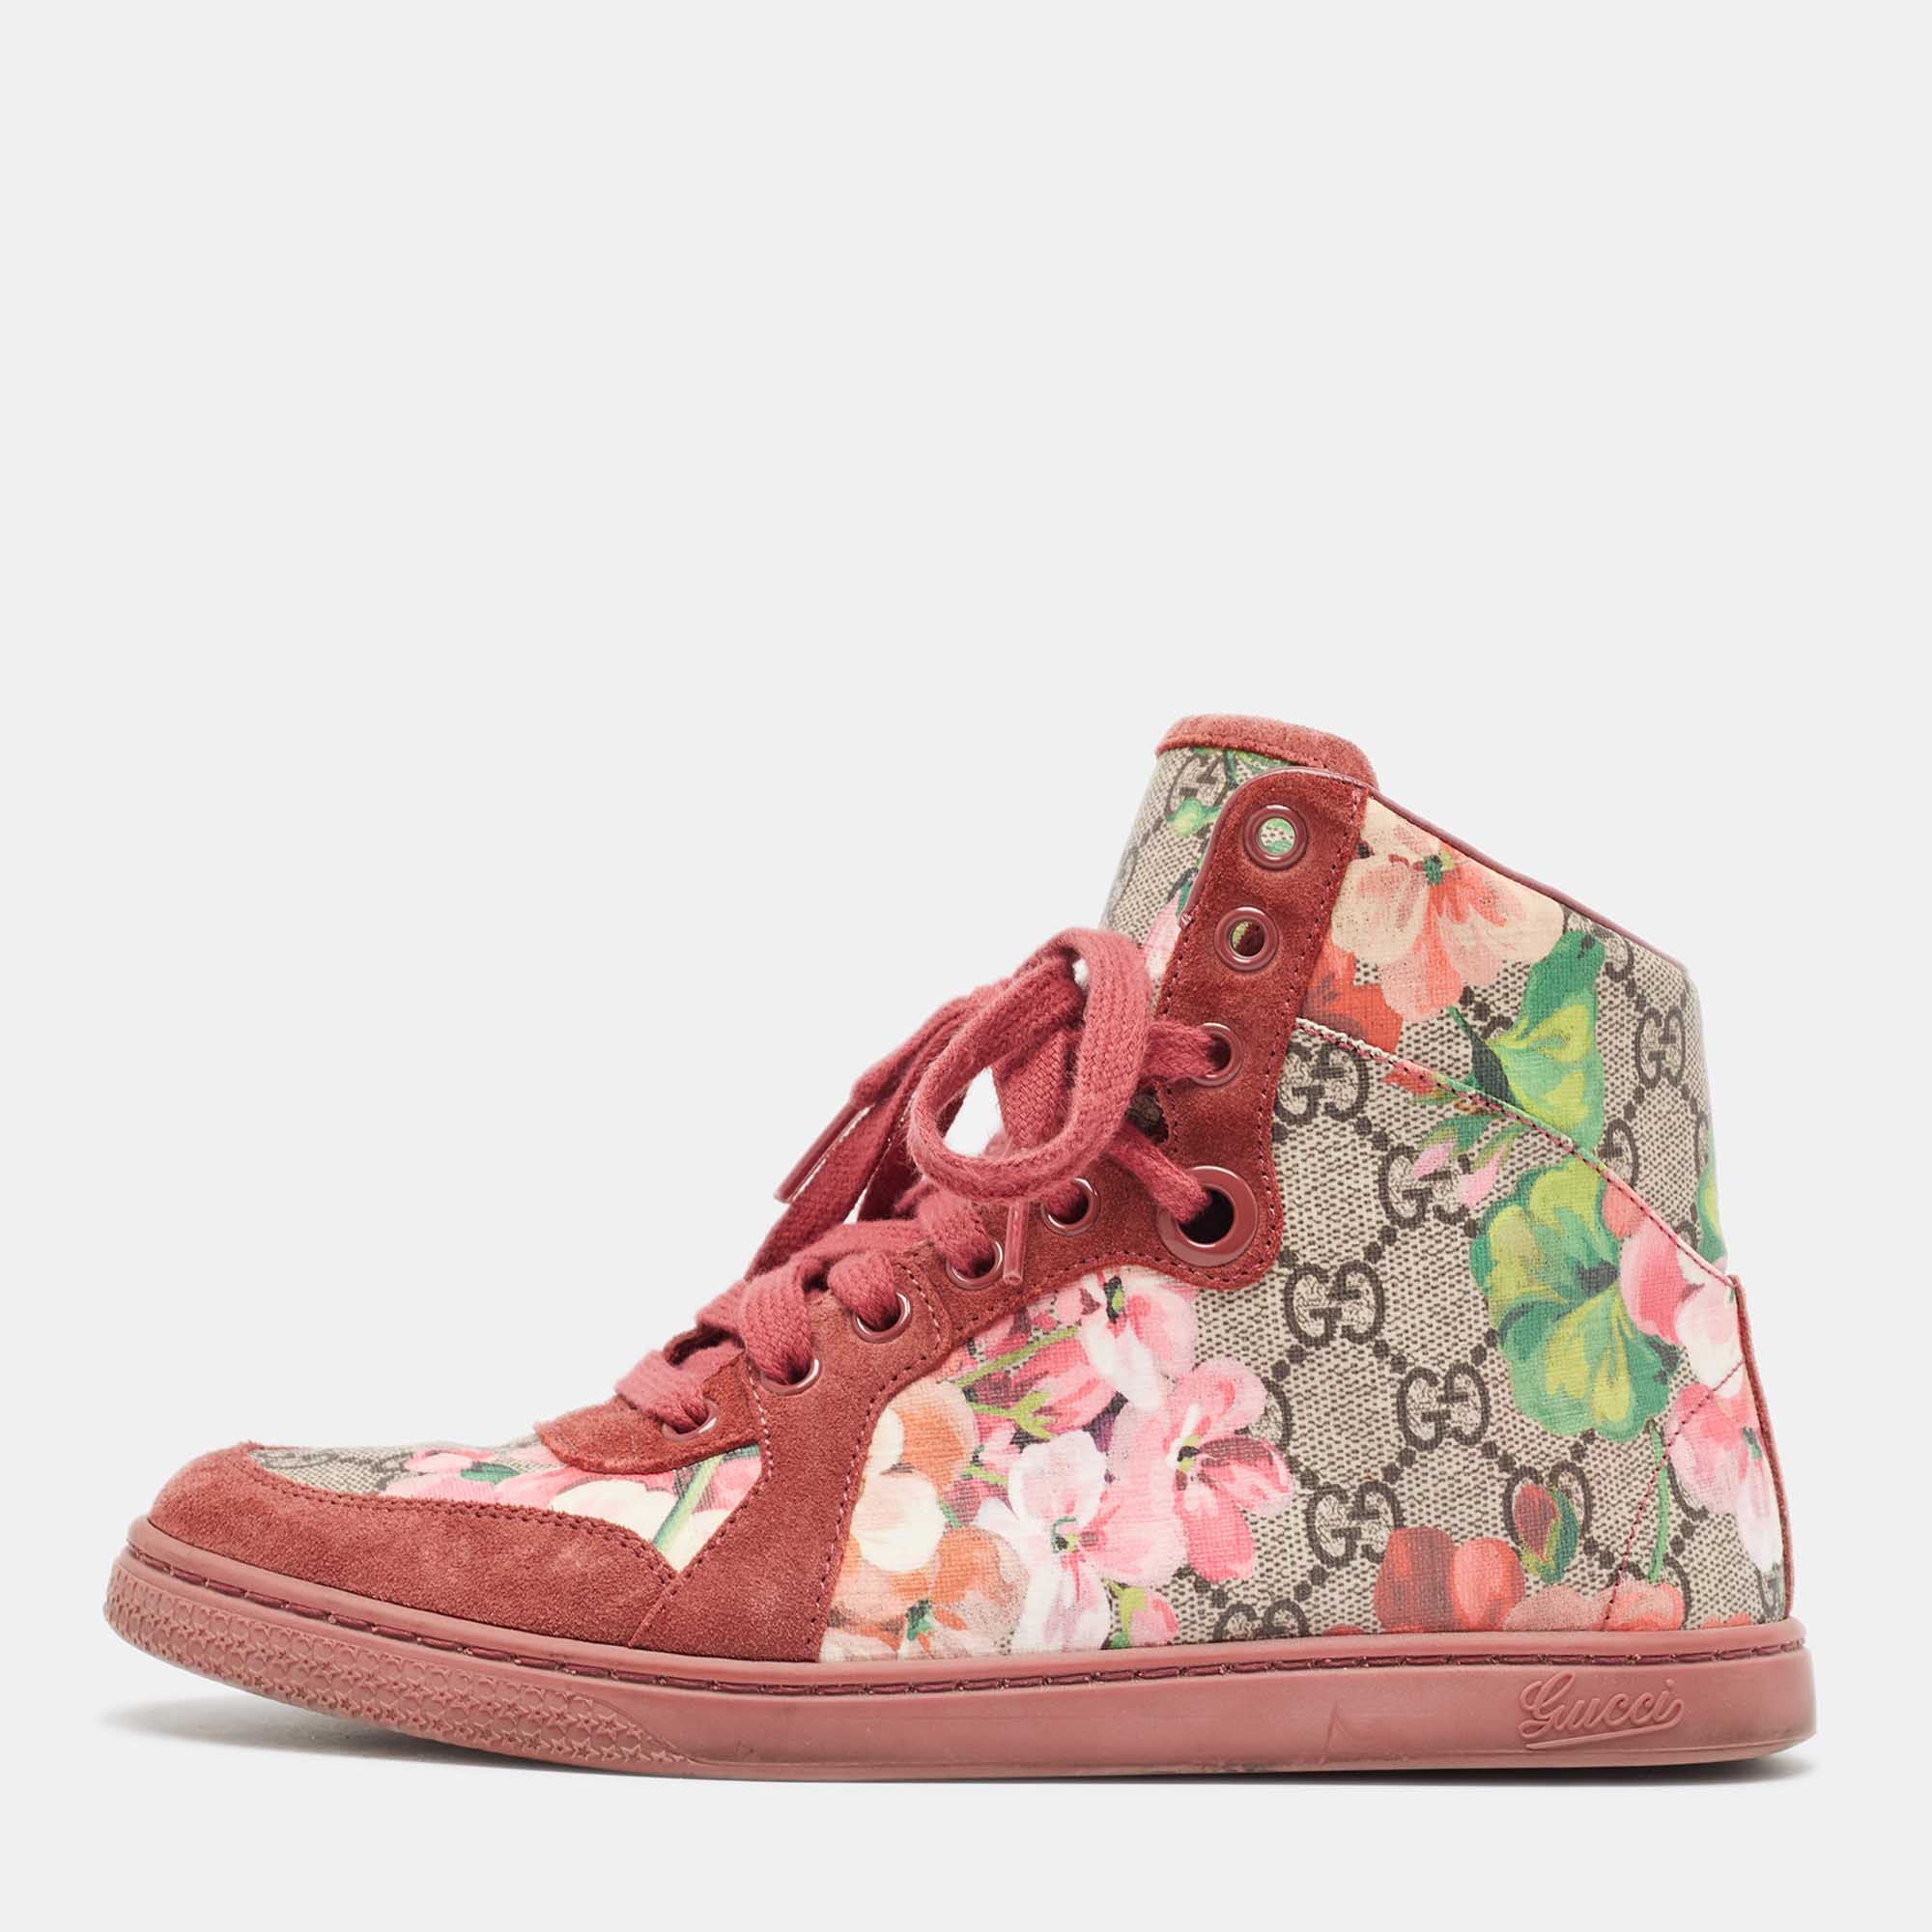 Gucci multicolor gg floral canvas and suede leather high top sneakers size 35.5